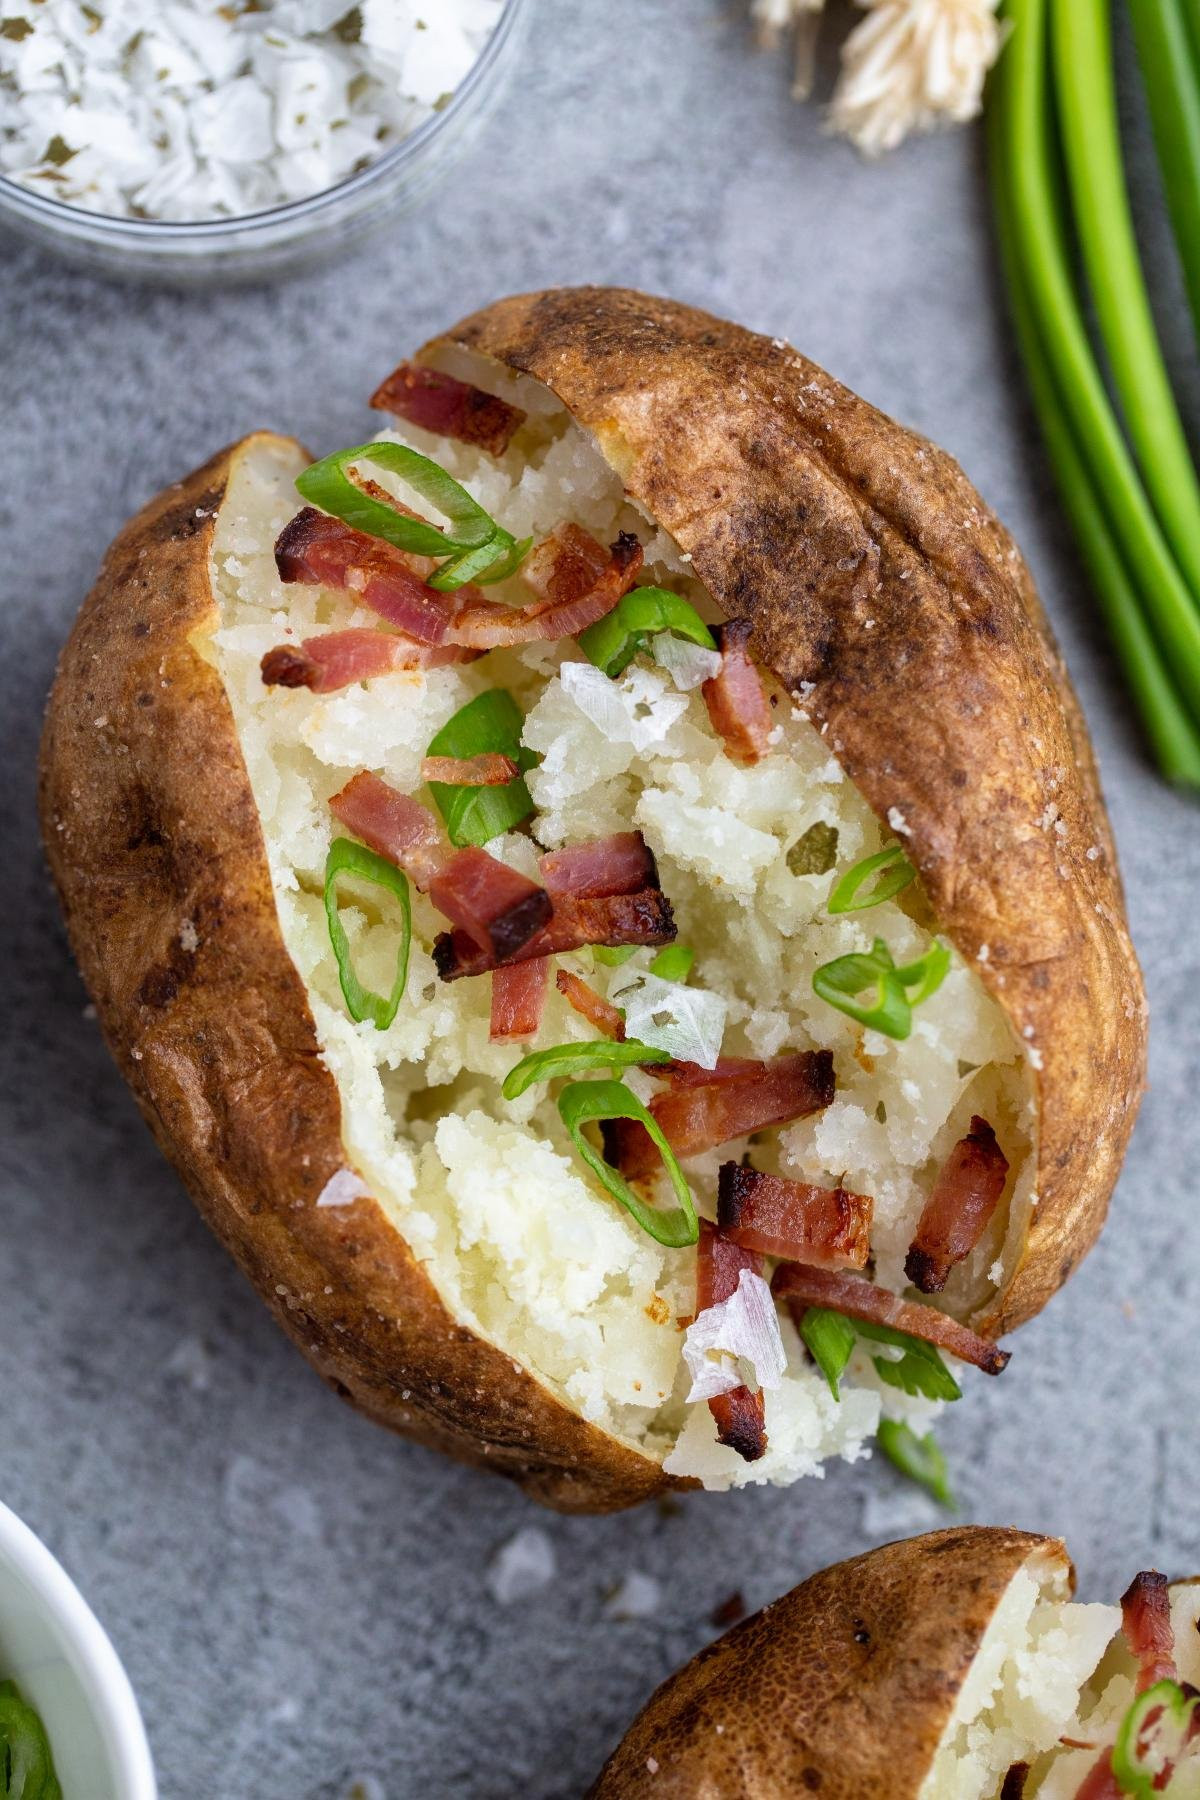 15 Delicious Air Fryer Baked Potato – Easy Recipes To Make at Home